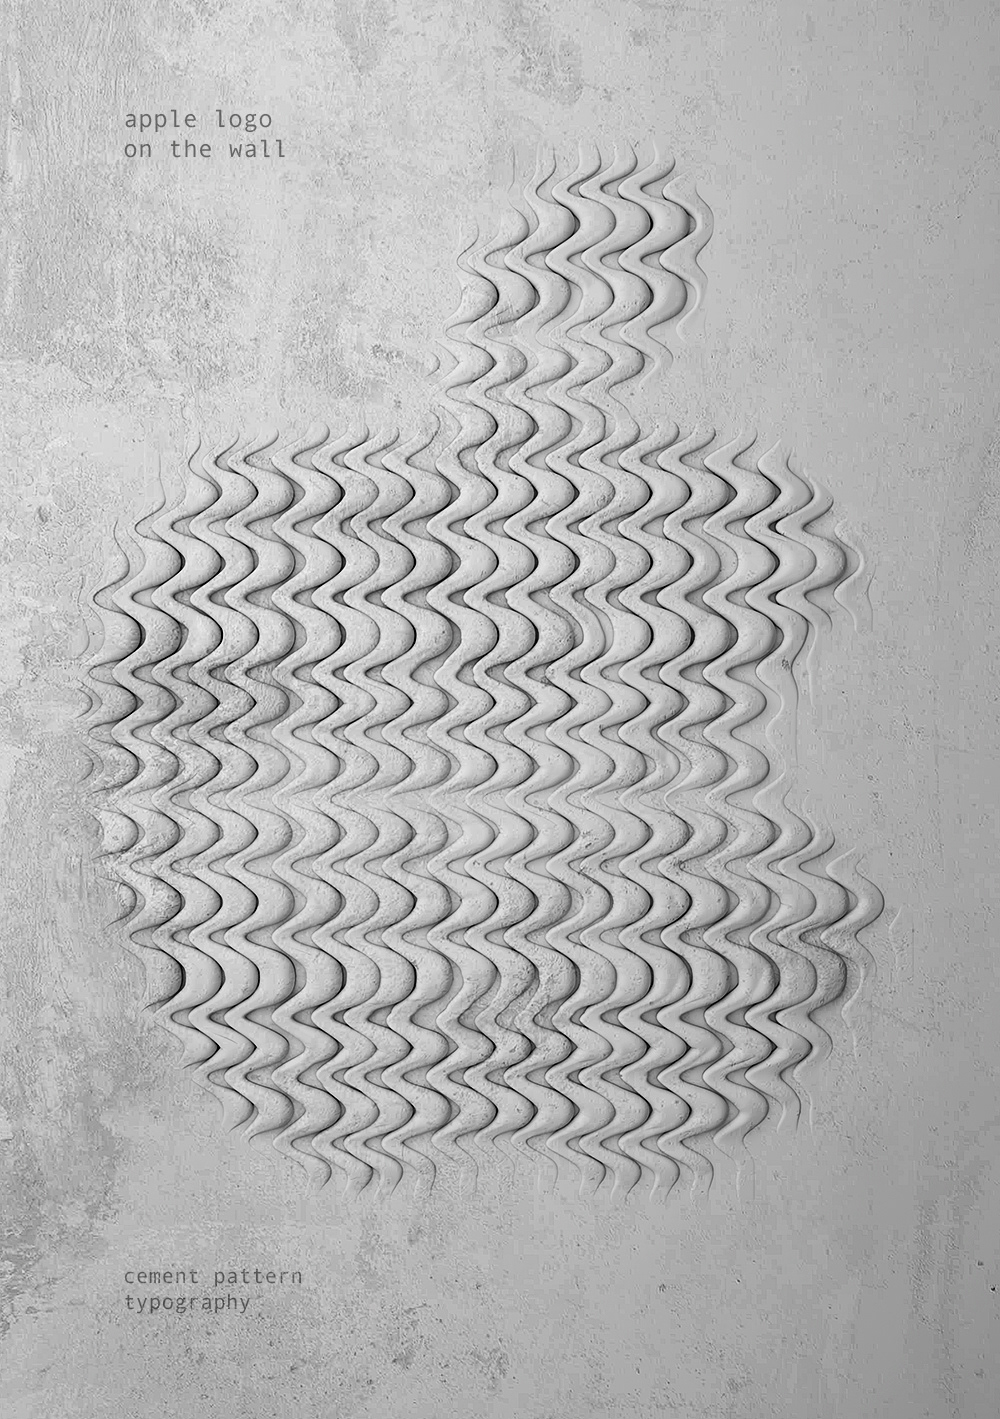 3D 3DType concrete experimental Experimental Typography pattern typography   wall logo